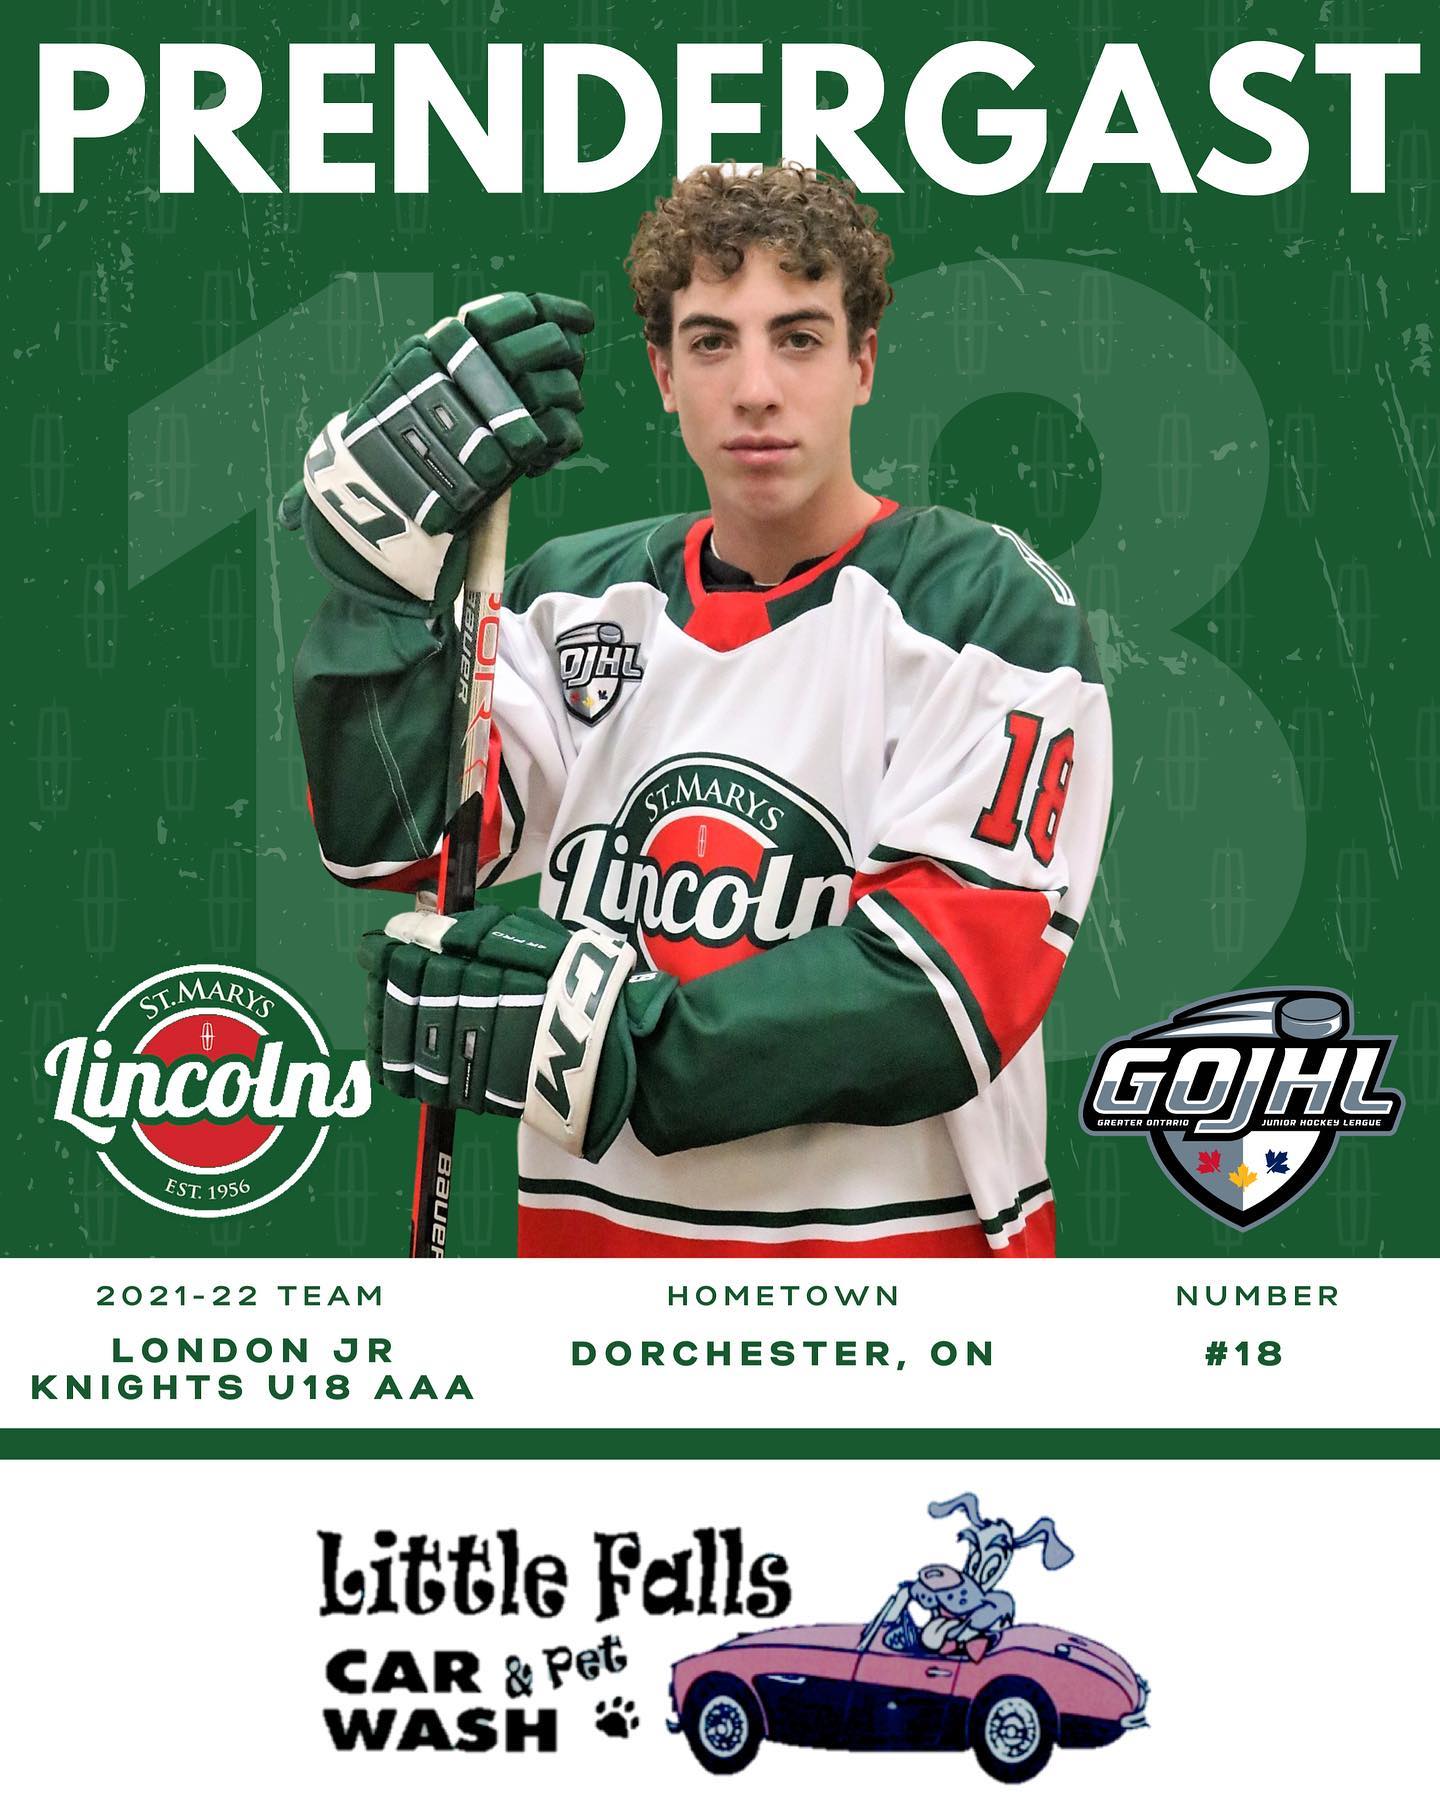 Meet the Lincs - Welcome Matthew Prendergast, sponsored by Little Falls Car & Pet Wash! Matthew AP’d with the Lincs last season, and led the London Jr Knights U18 Squad in scoring #WeAreLincolns